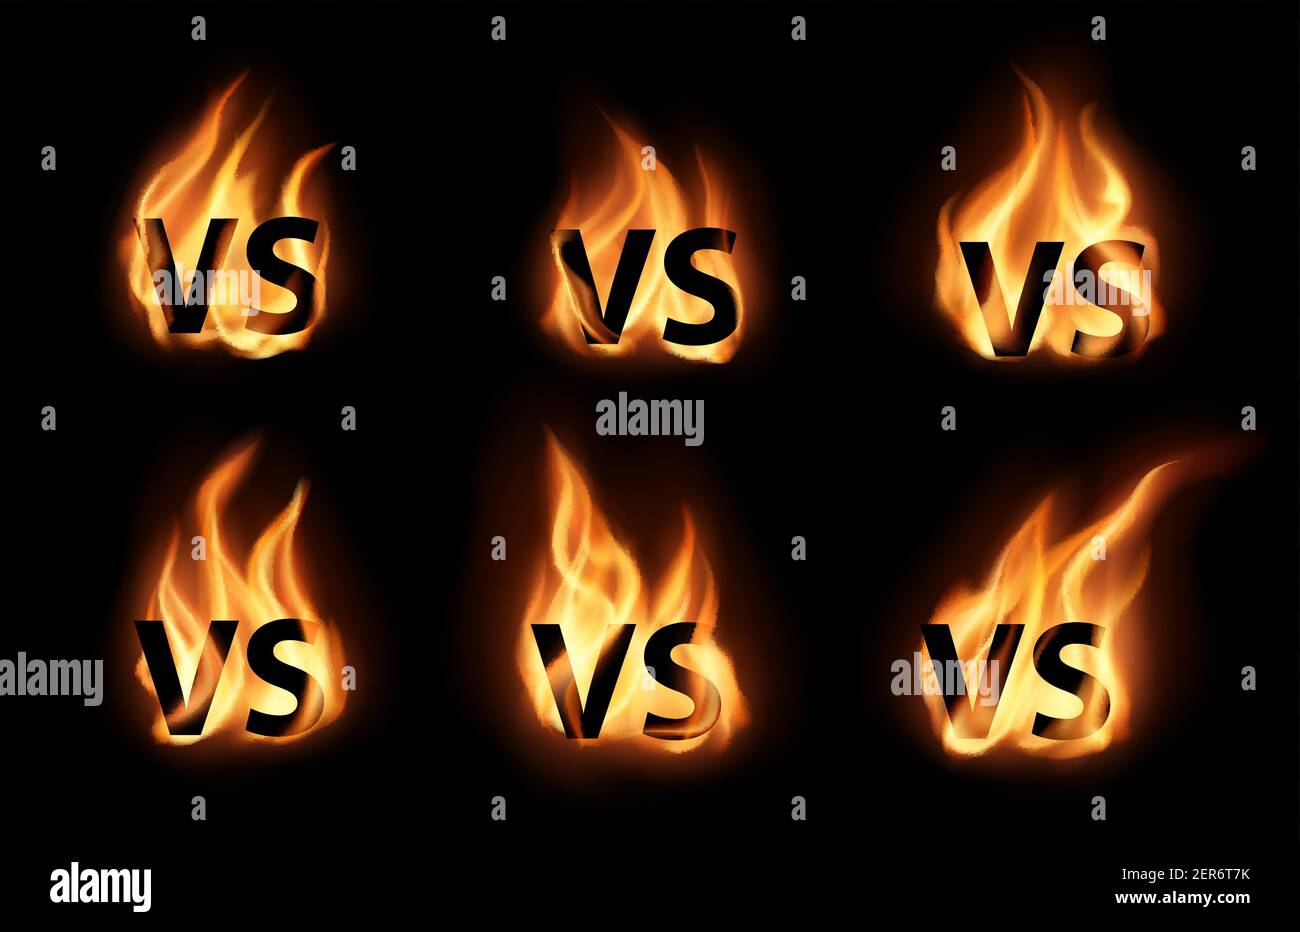 Versus or VS with realistic fire flames vector icons set. VS symbols of sport game battles, boxing fights, team challenges and championship matches on Stock Vector